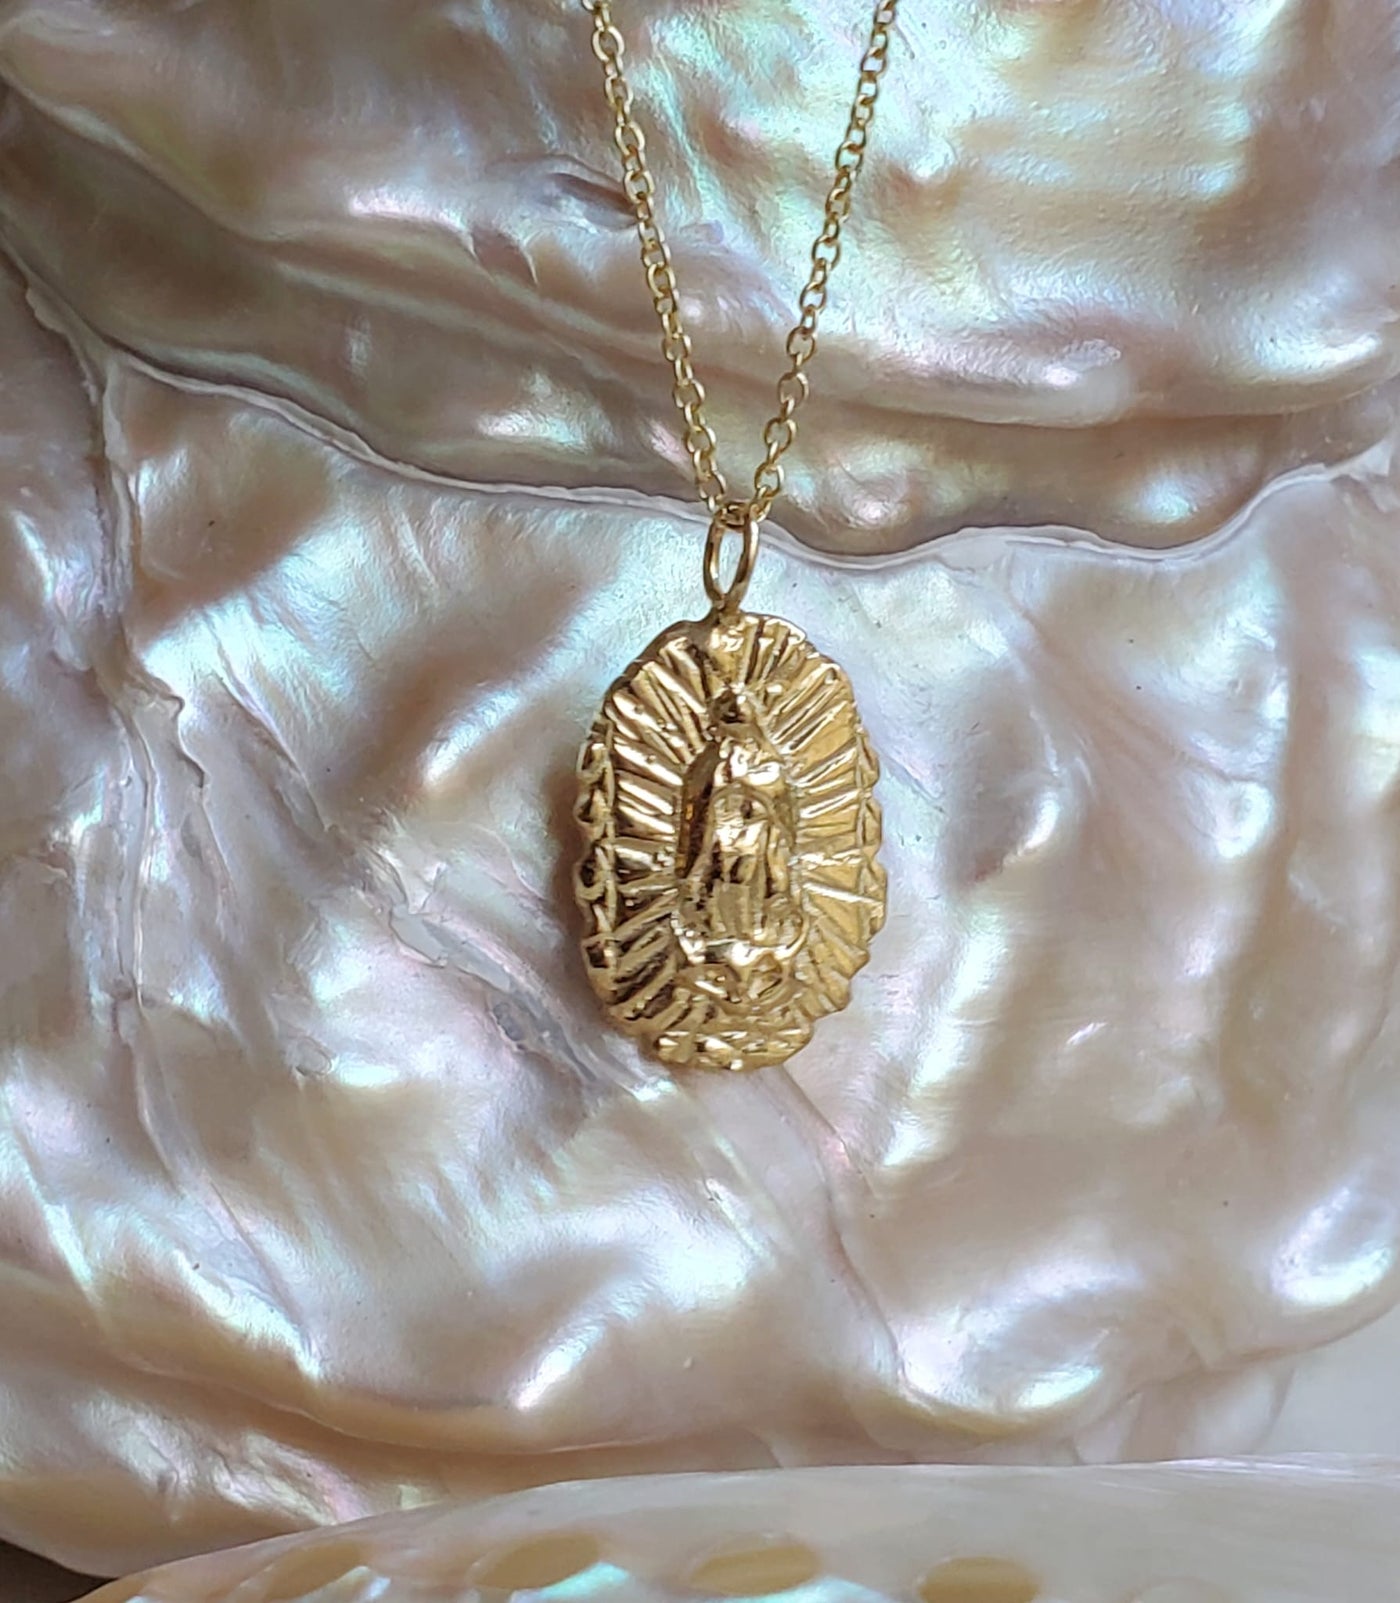 Our Lady of Guadalupe Medallion